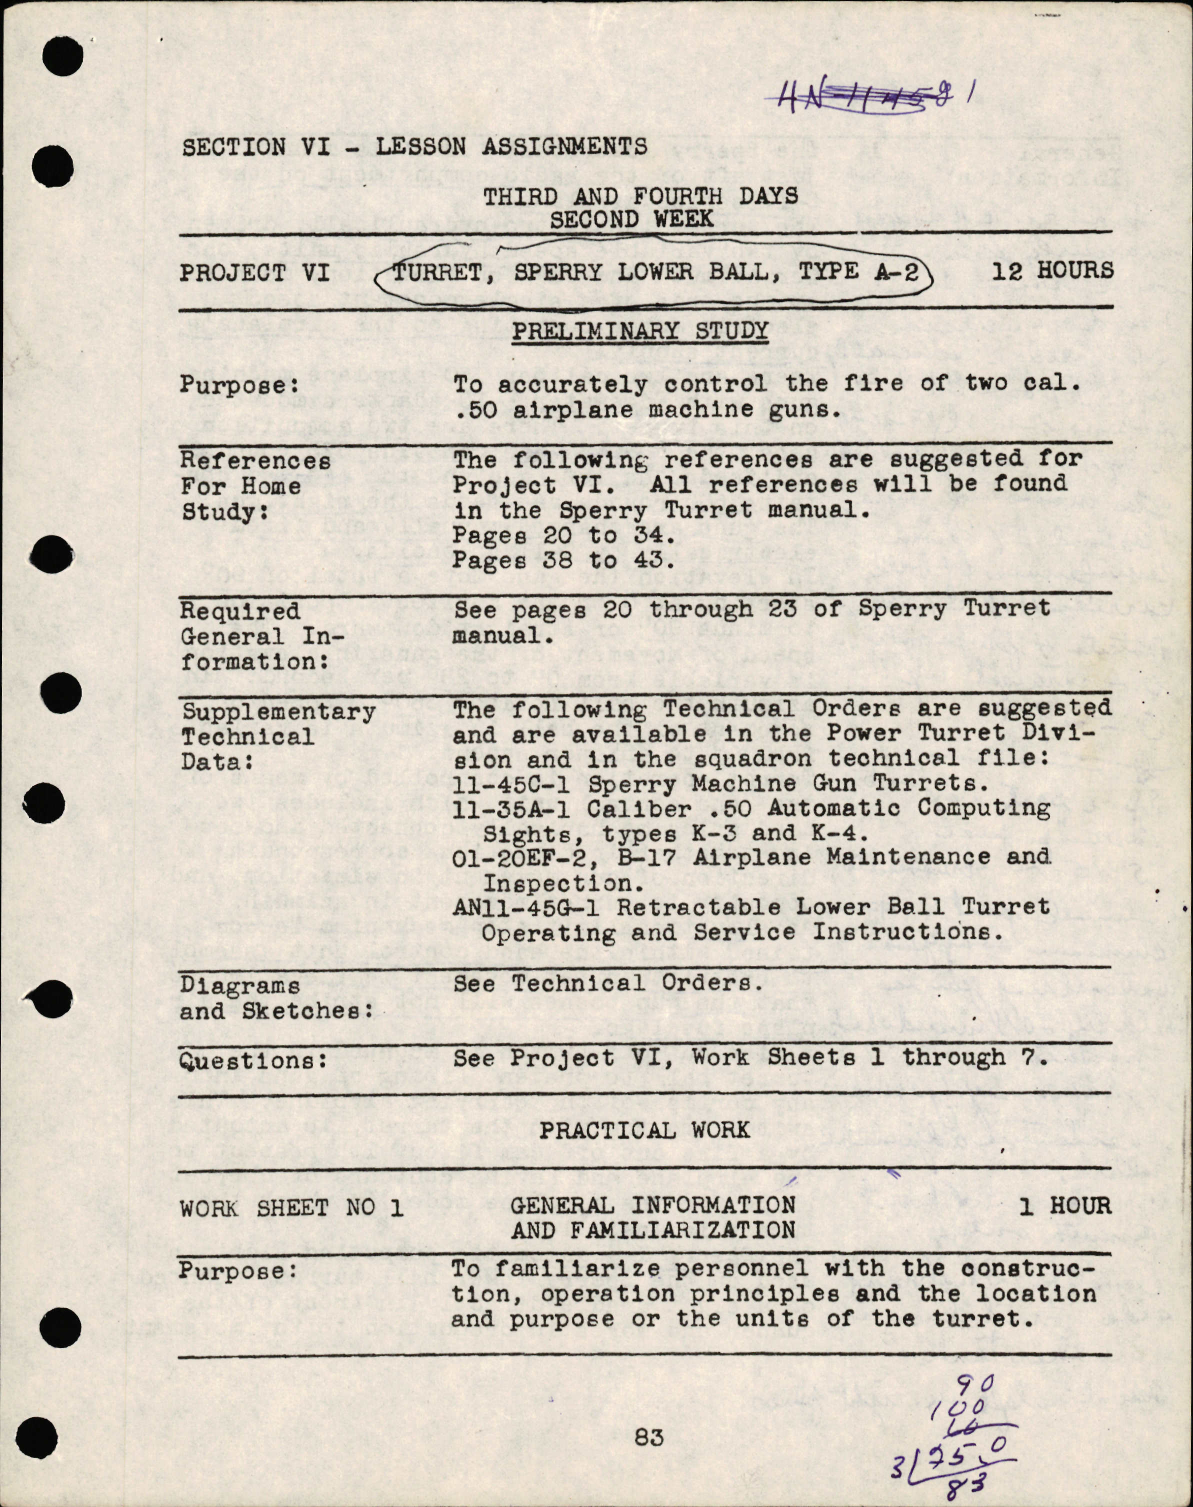 Sample page 1 from AirCorps Library document: Lesson Assignments for Turret, Sperry Lower Ball, Type A-2